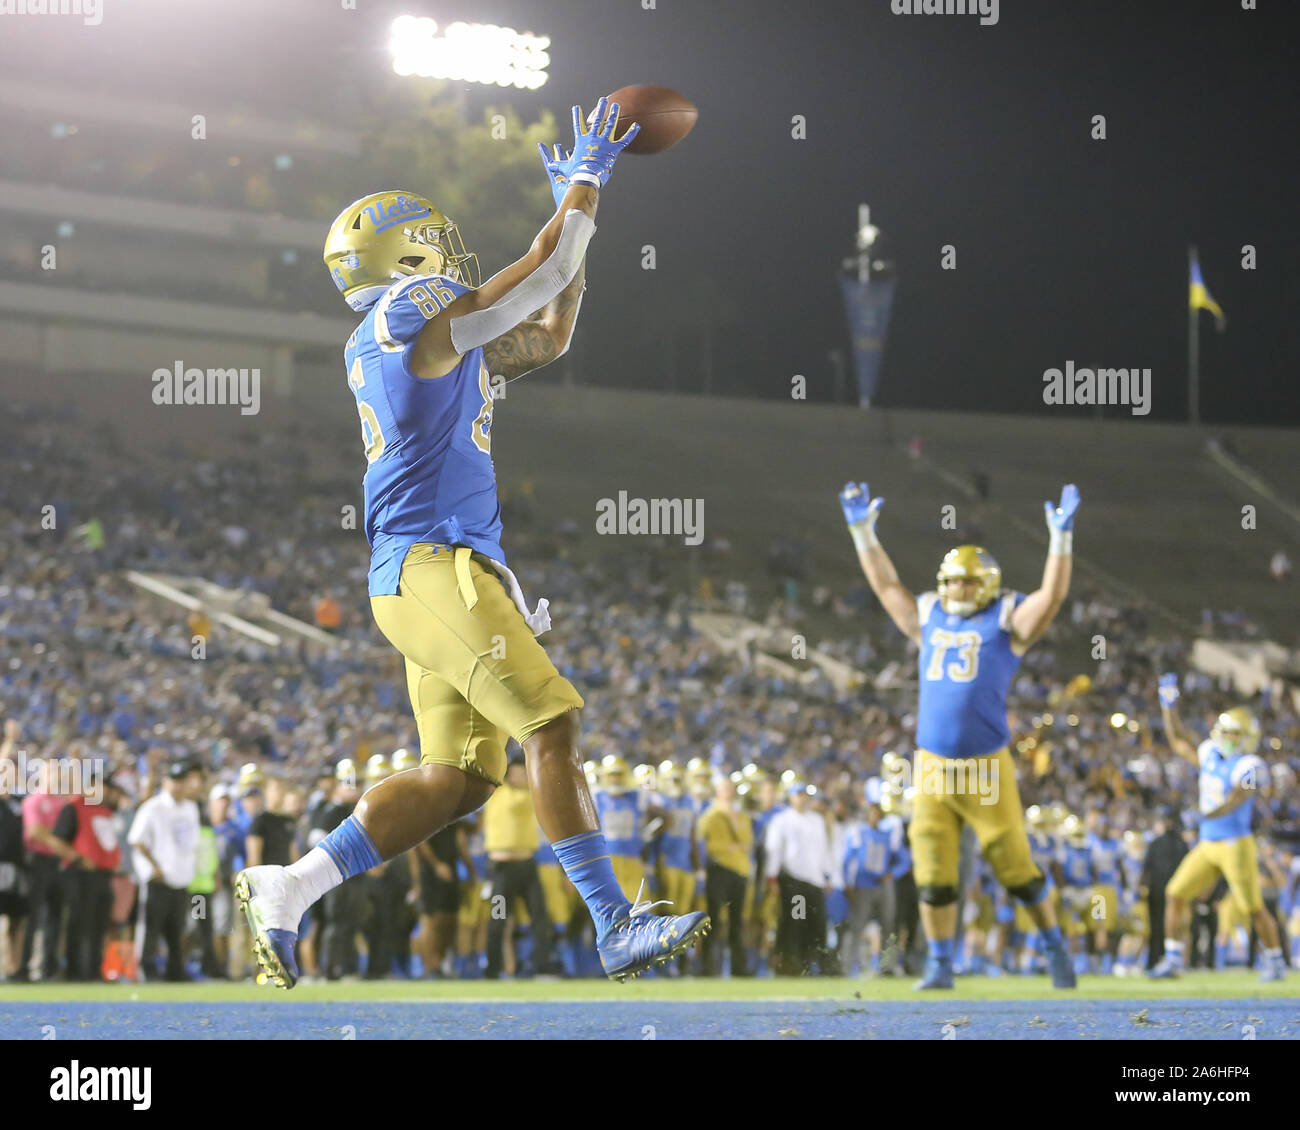 Pasadena CA. 26th Oct, 2019. UCLA Bruins tight end Devin Asiasi #86 catches a touchdown during the Arizona State vs UCLA Bruins at the Rose Bowl in Pasadena, Ca. on October 26, 2019 (Photo by Jevone Moore). Credit: csm/Alamy Live News Stock Photo